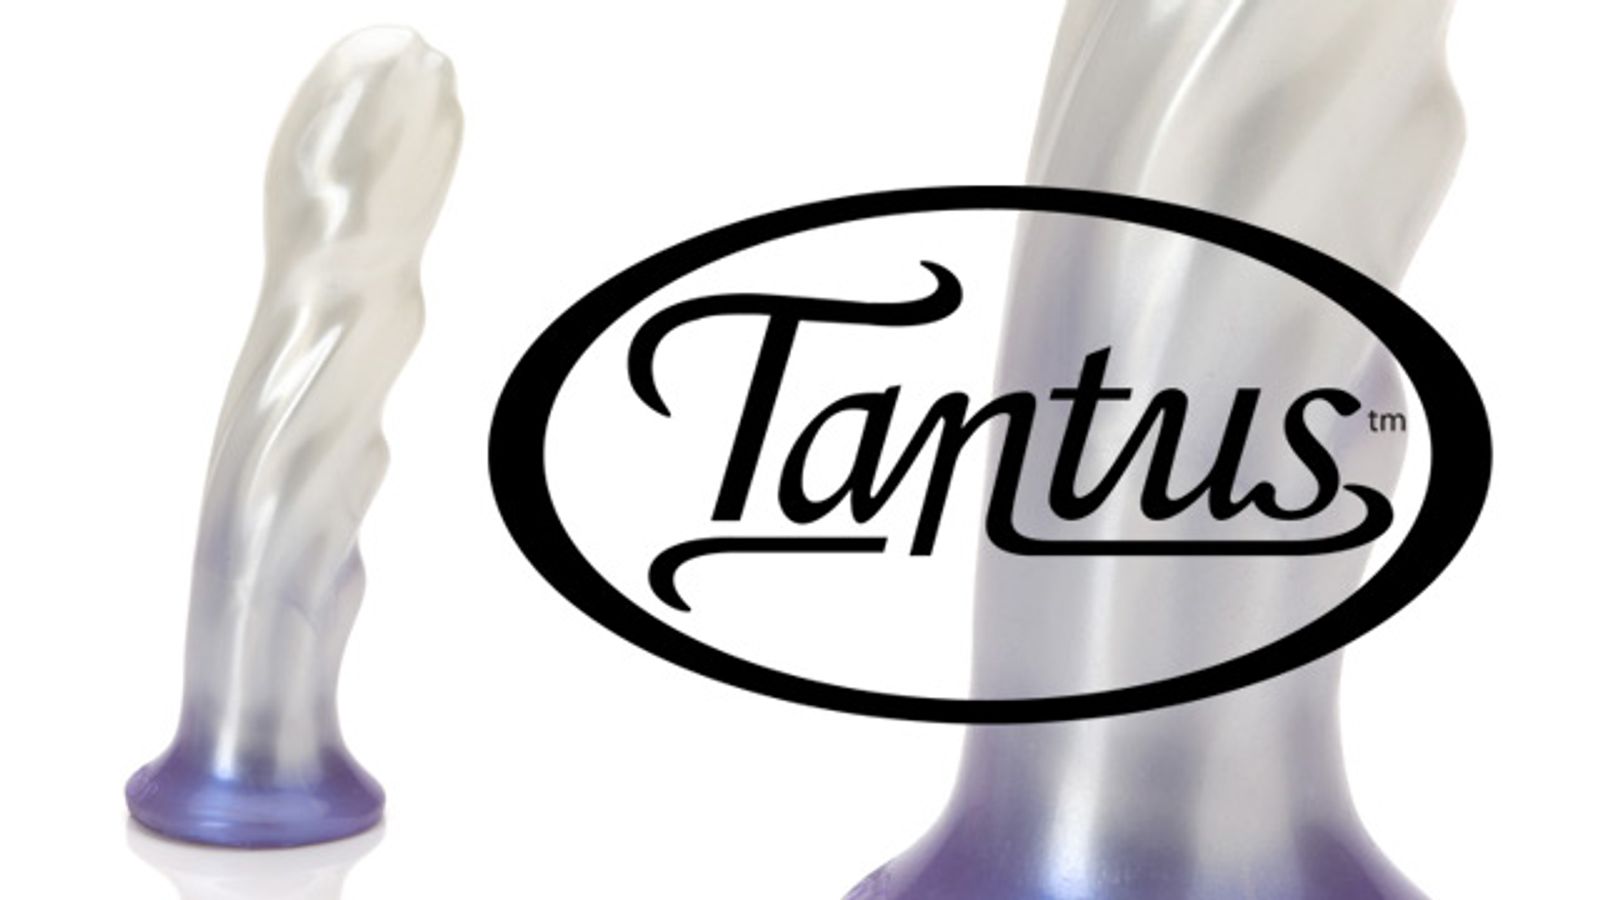 American Cancer Society to Benefit from Tantus Panacea Sales